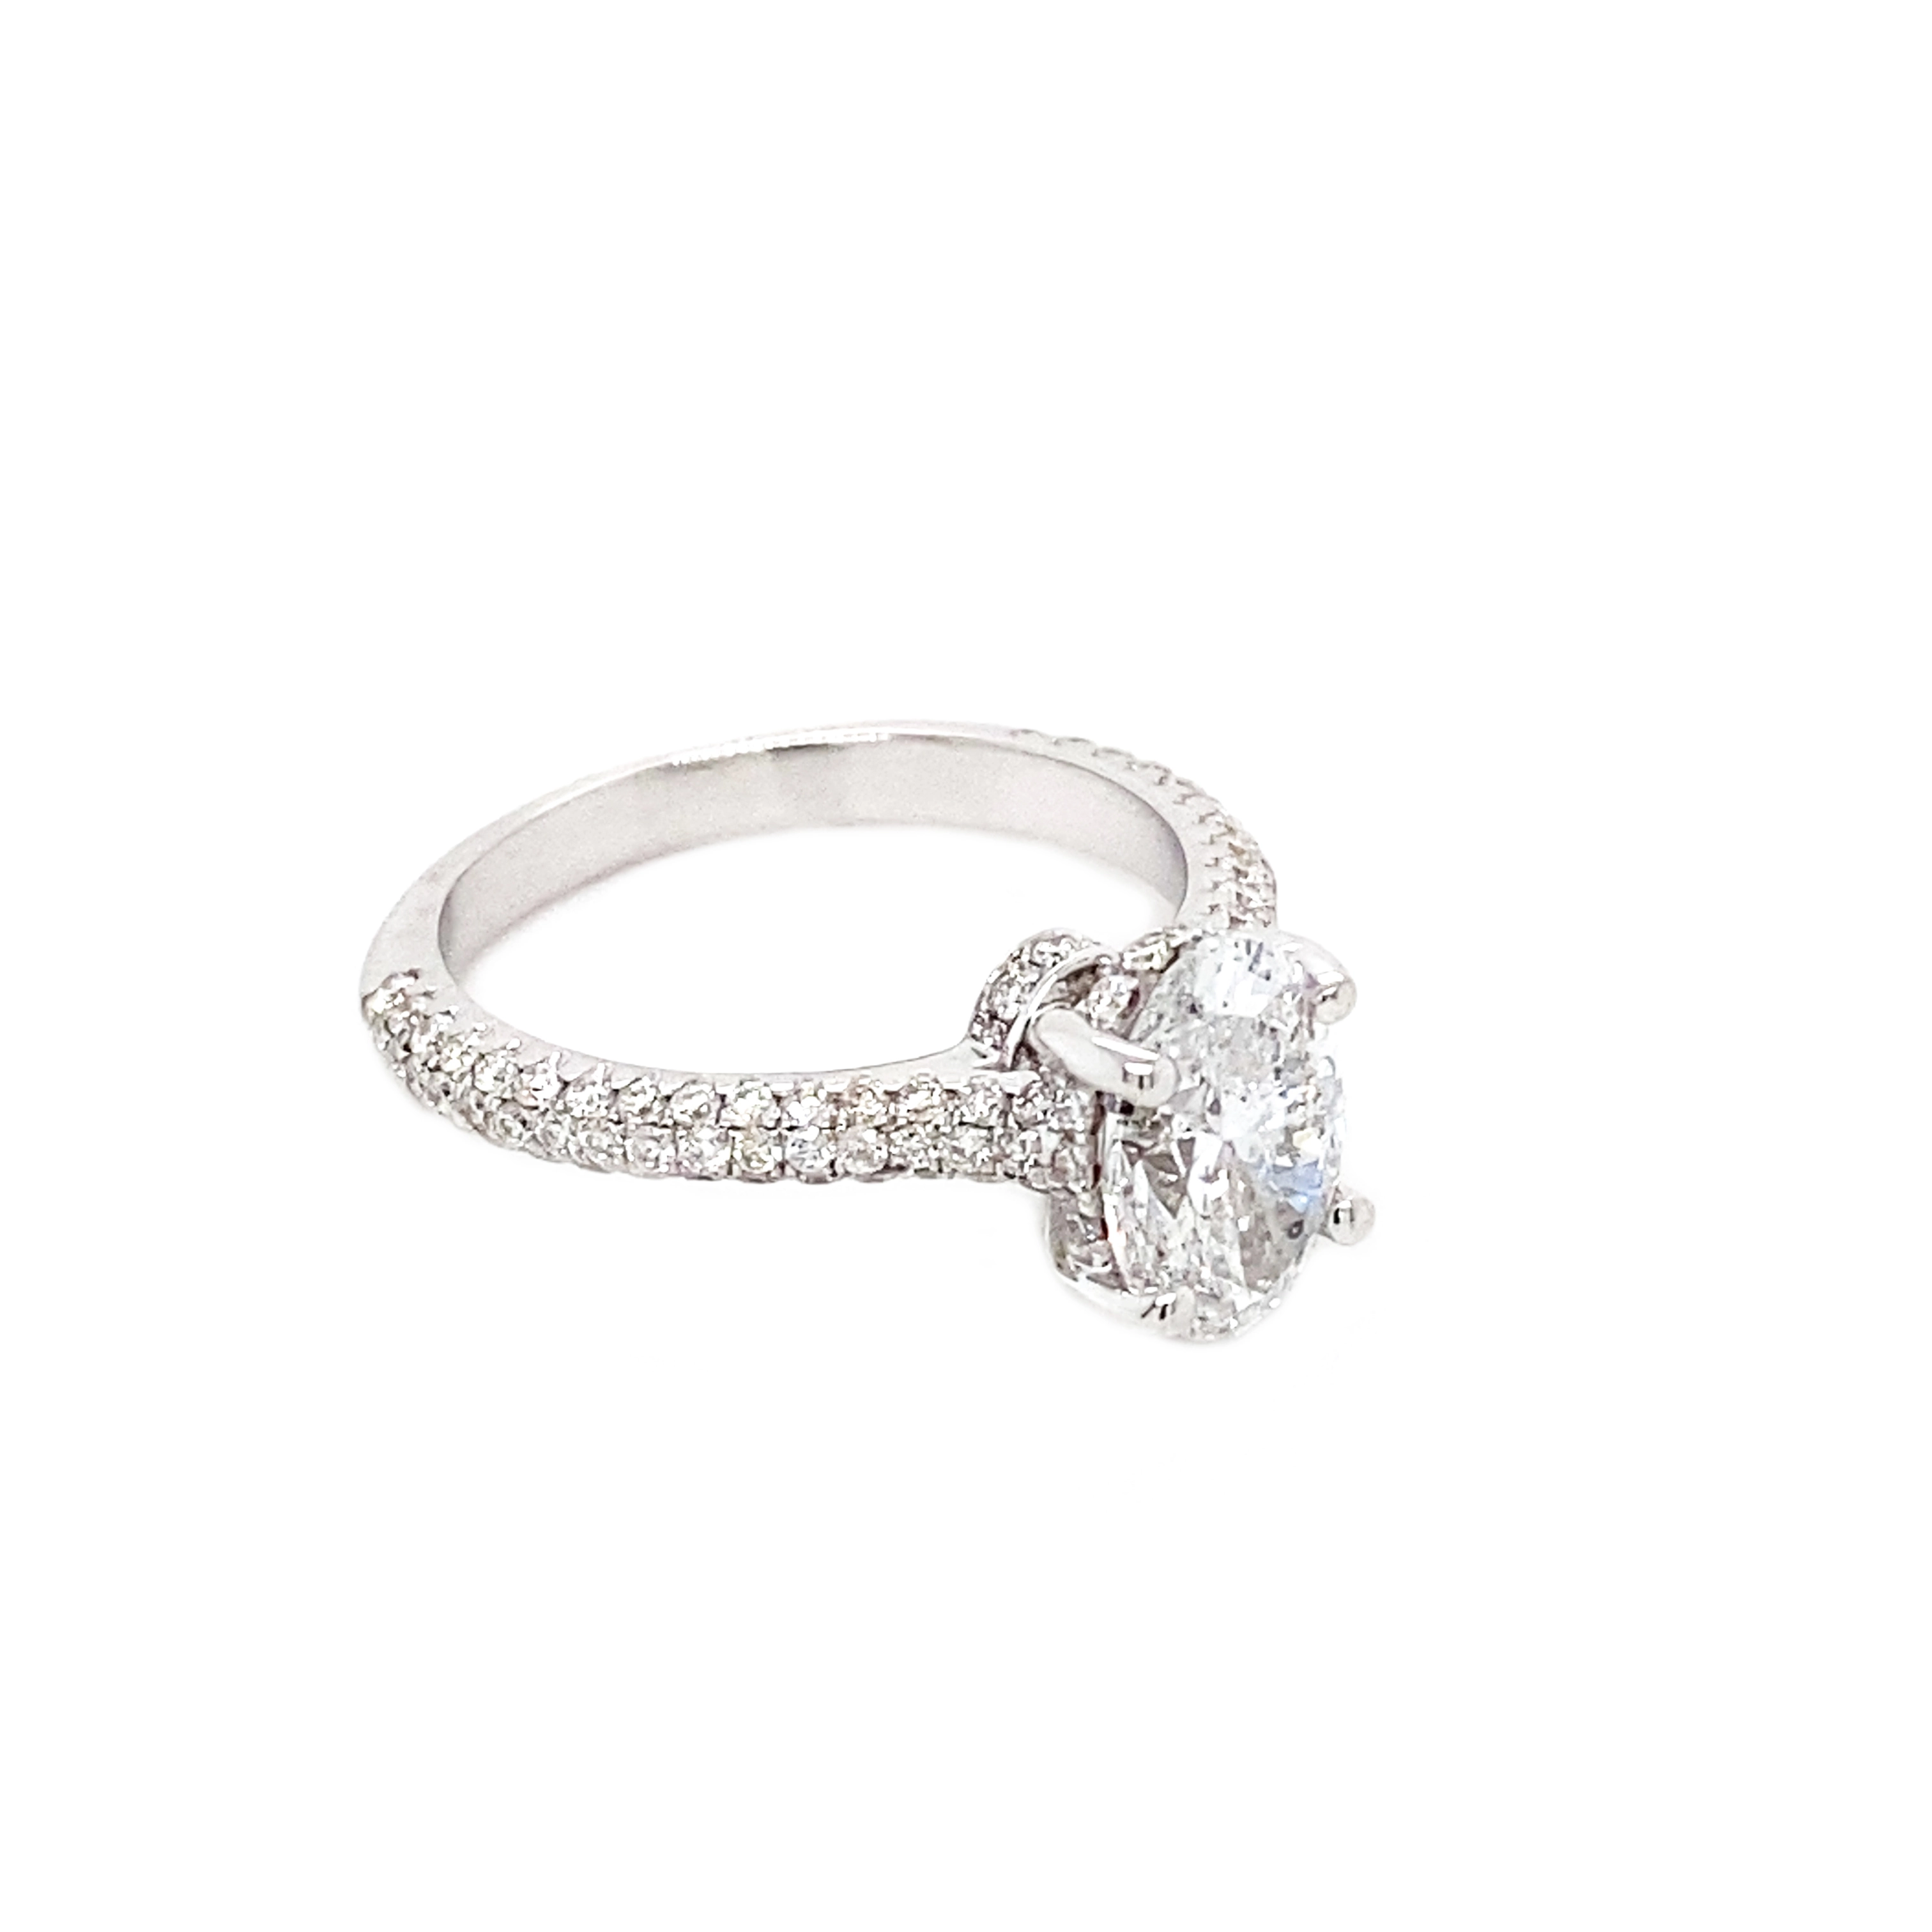 1.5 carat Oval Engagement Ring